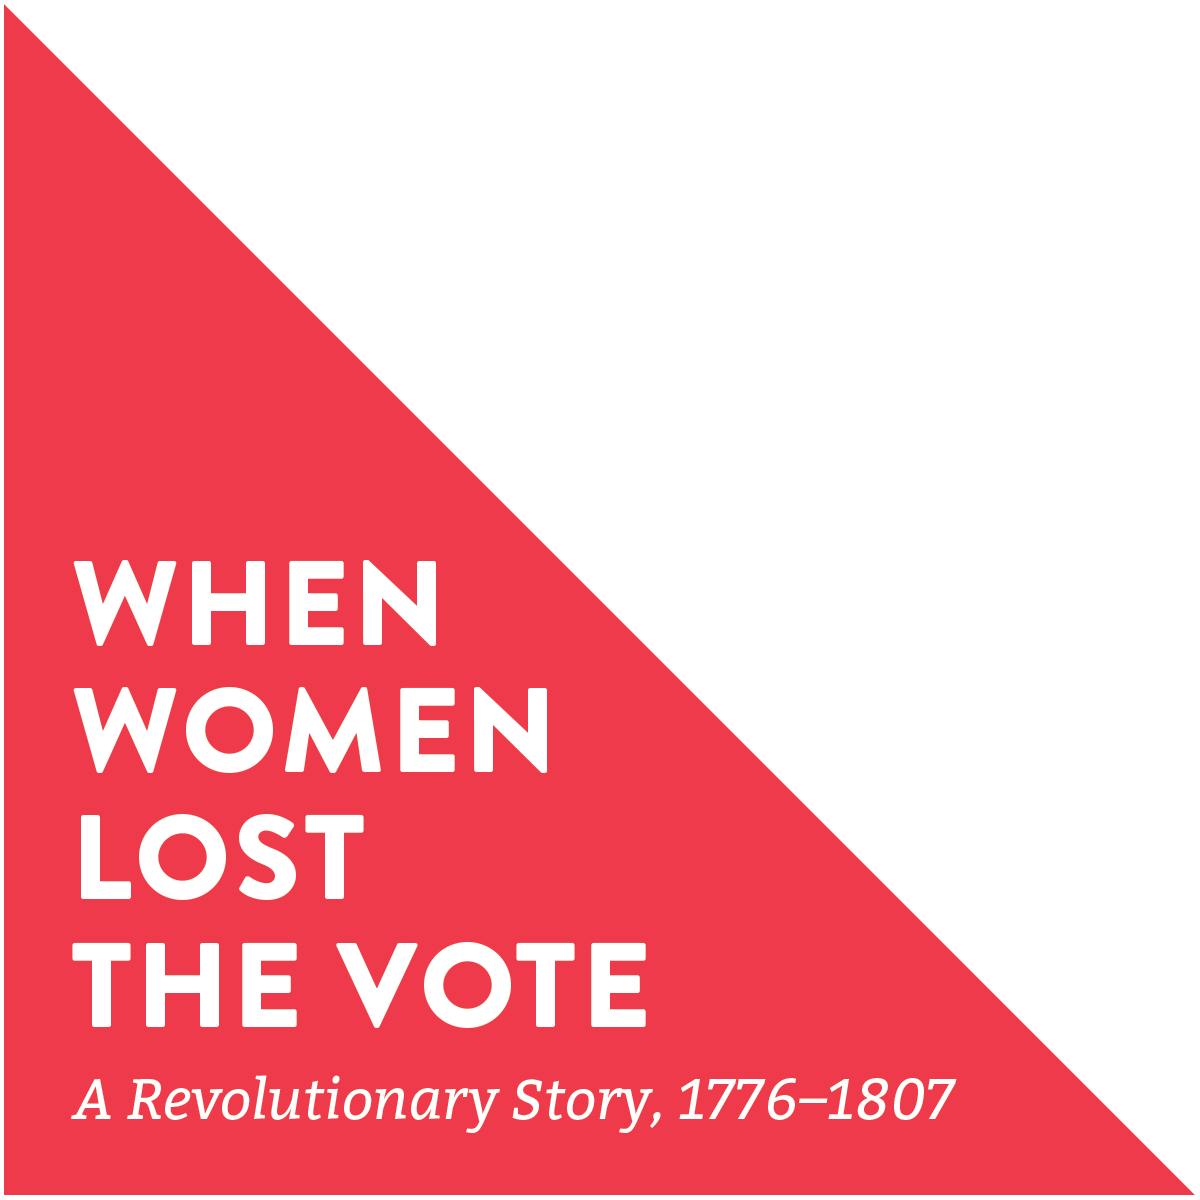 When Women Lost the Vote: A Revolutionary Story